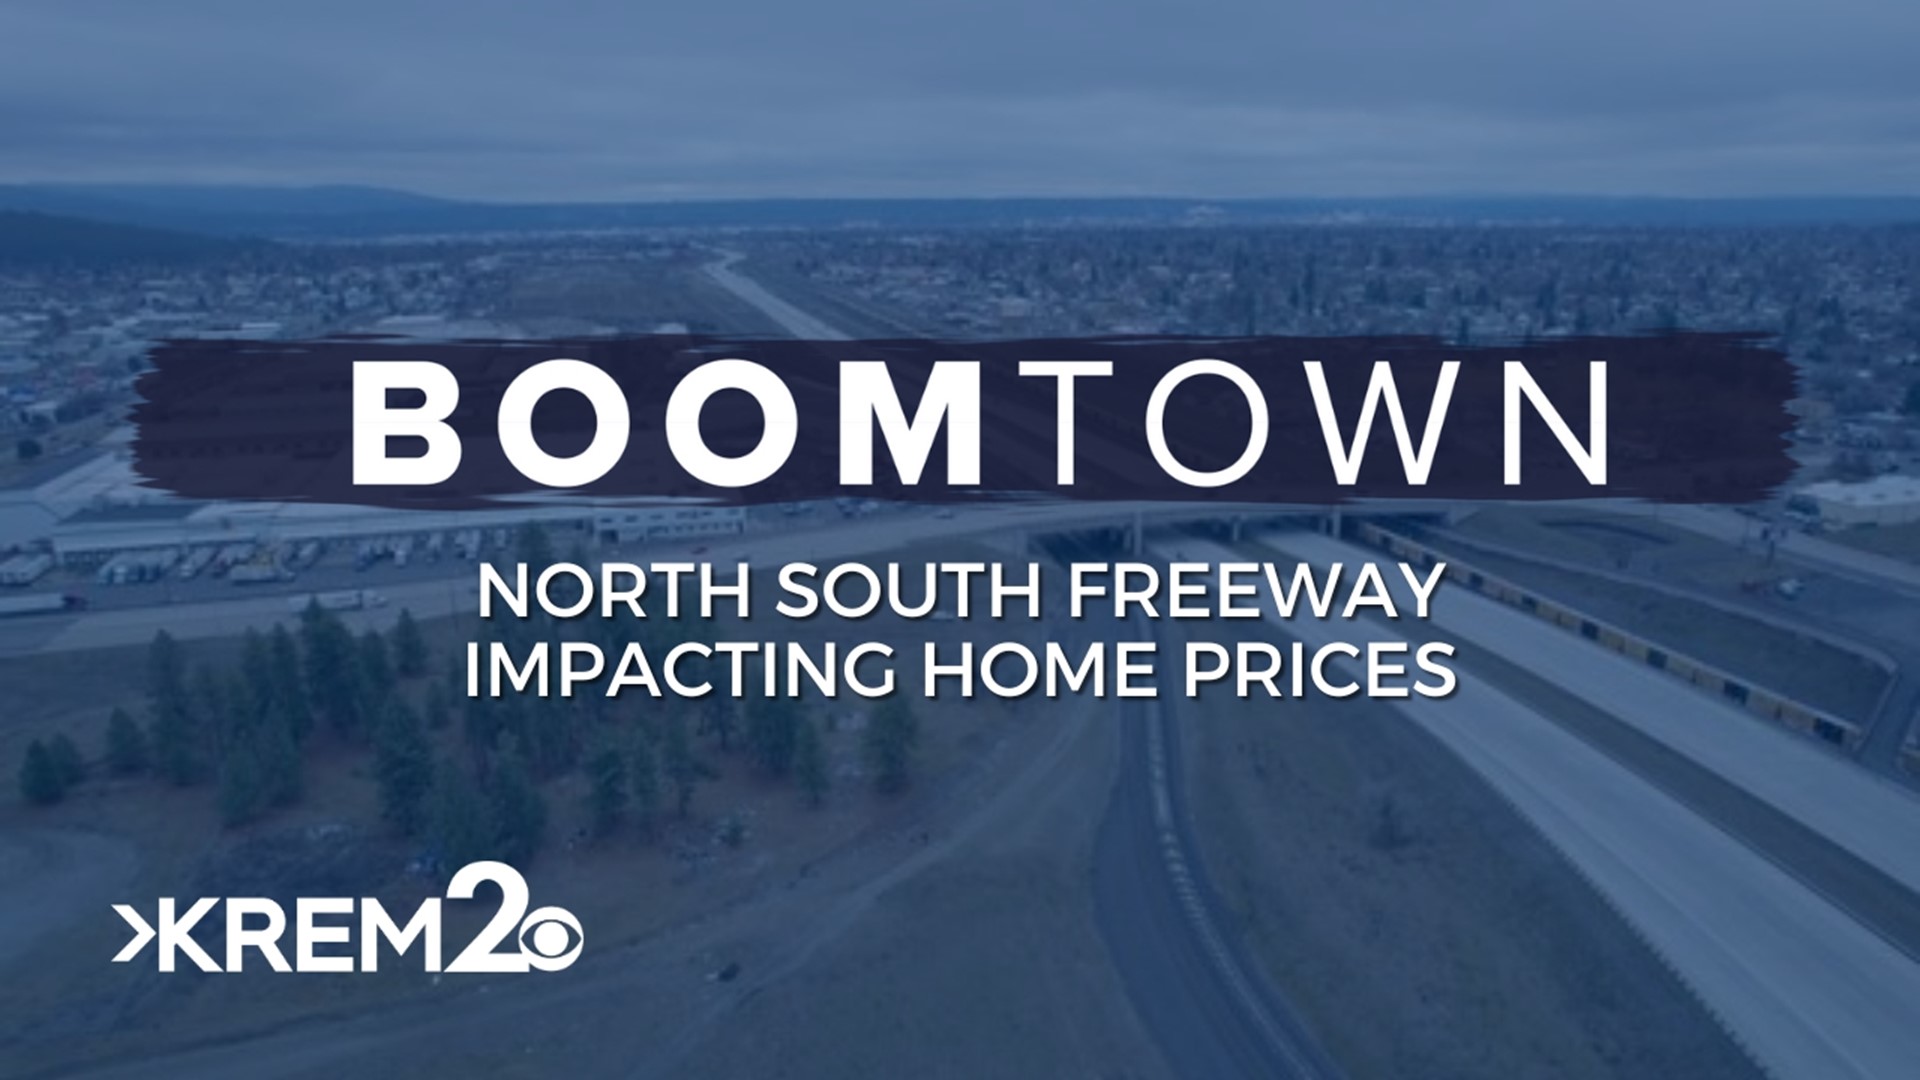 Although the freeway was meant to help alleviate traffic on arterials, it is bringing about unforeseen positives for many Spokane residents.